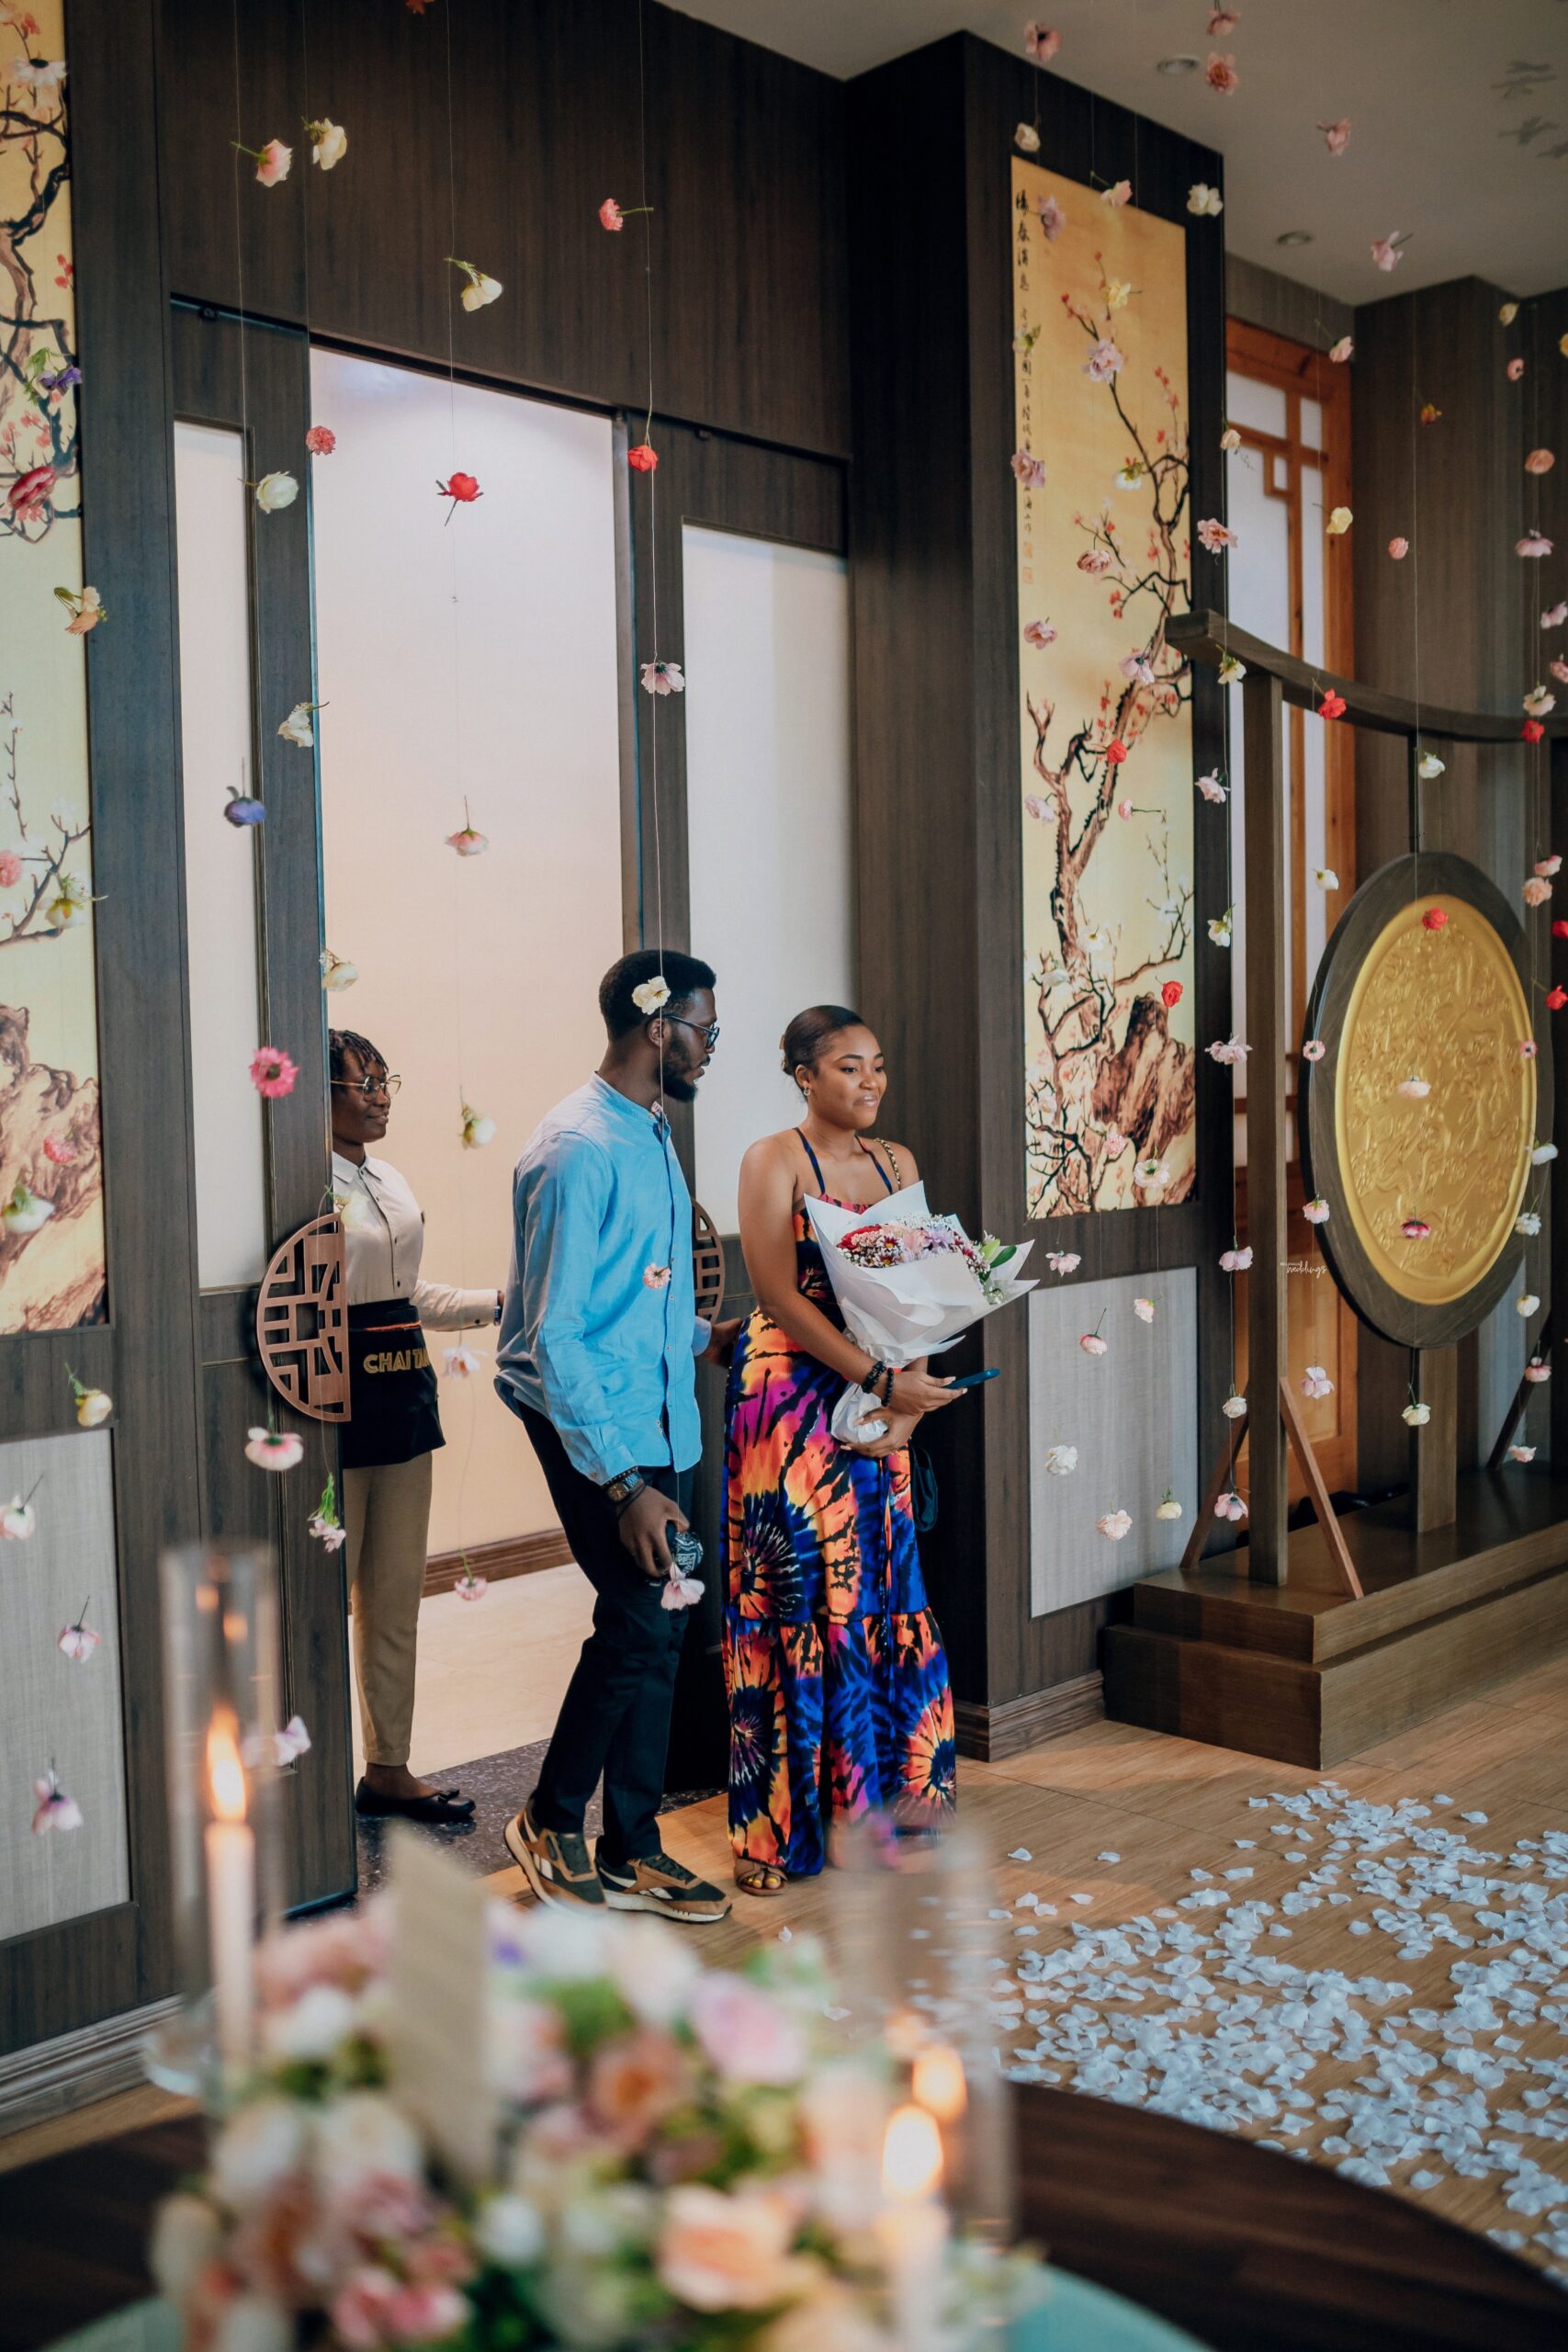 It Was Love at First Sight in NYSC Camp! Enjoy Esther & Peter's Indoor Proposal